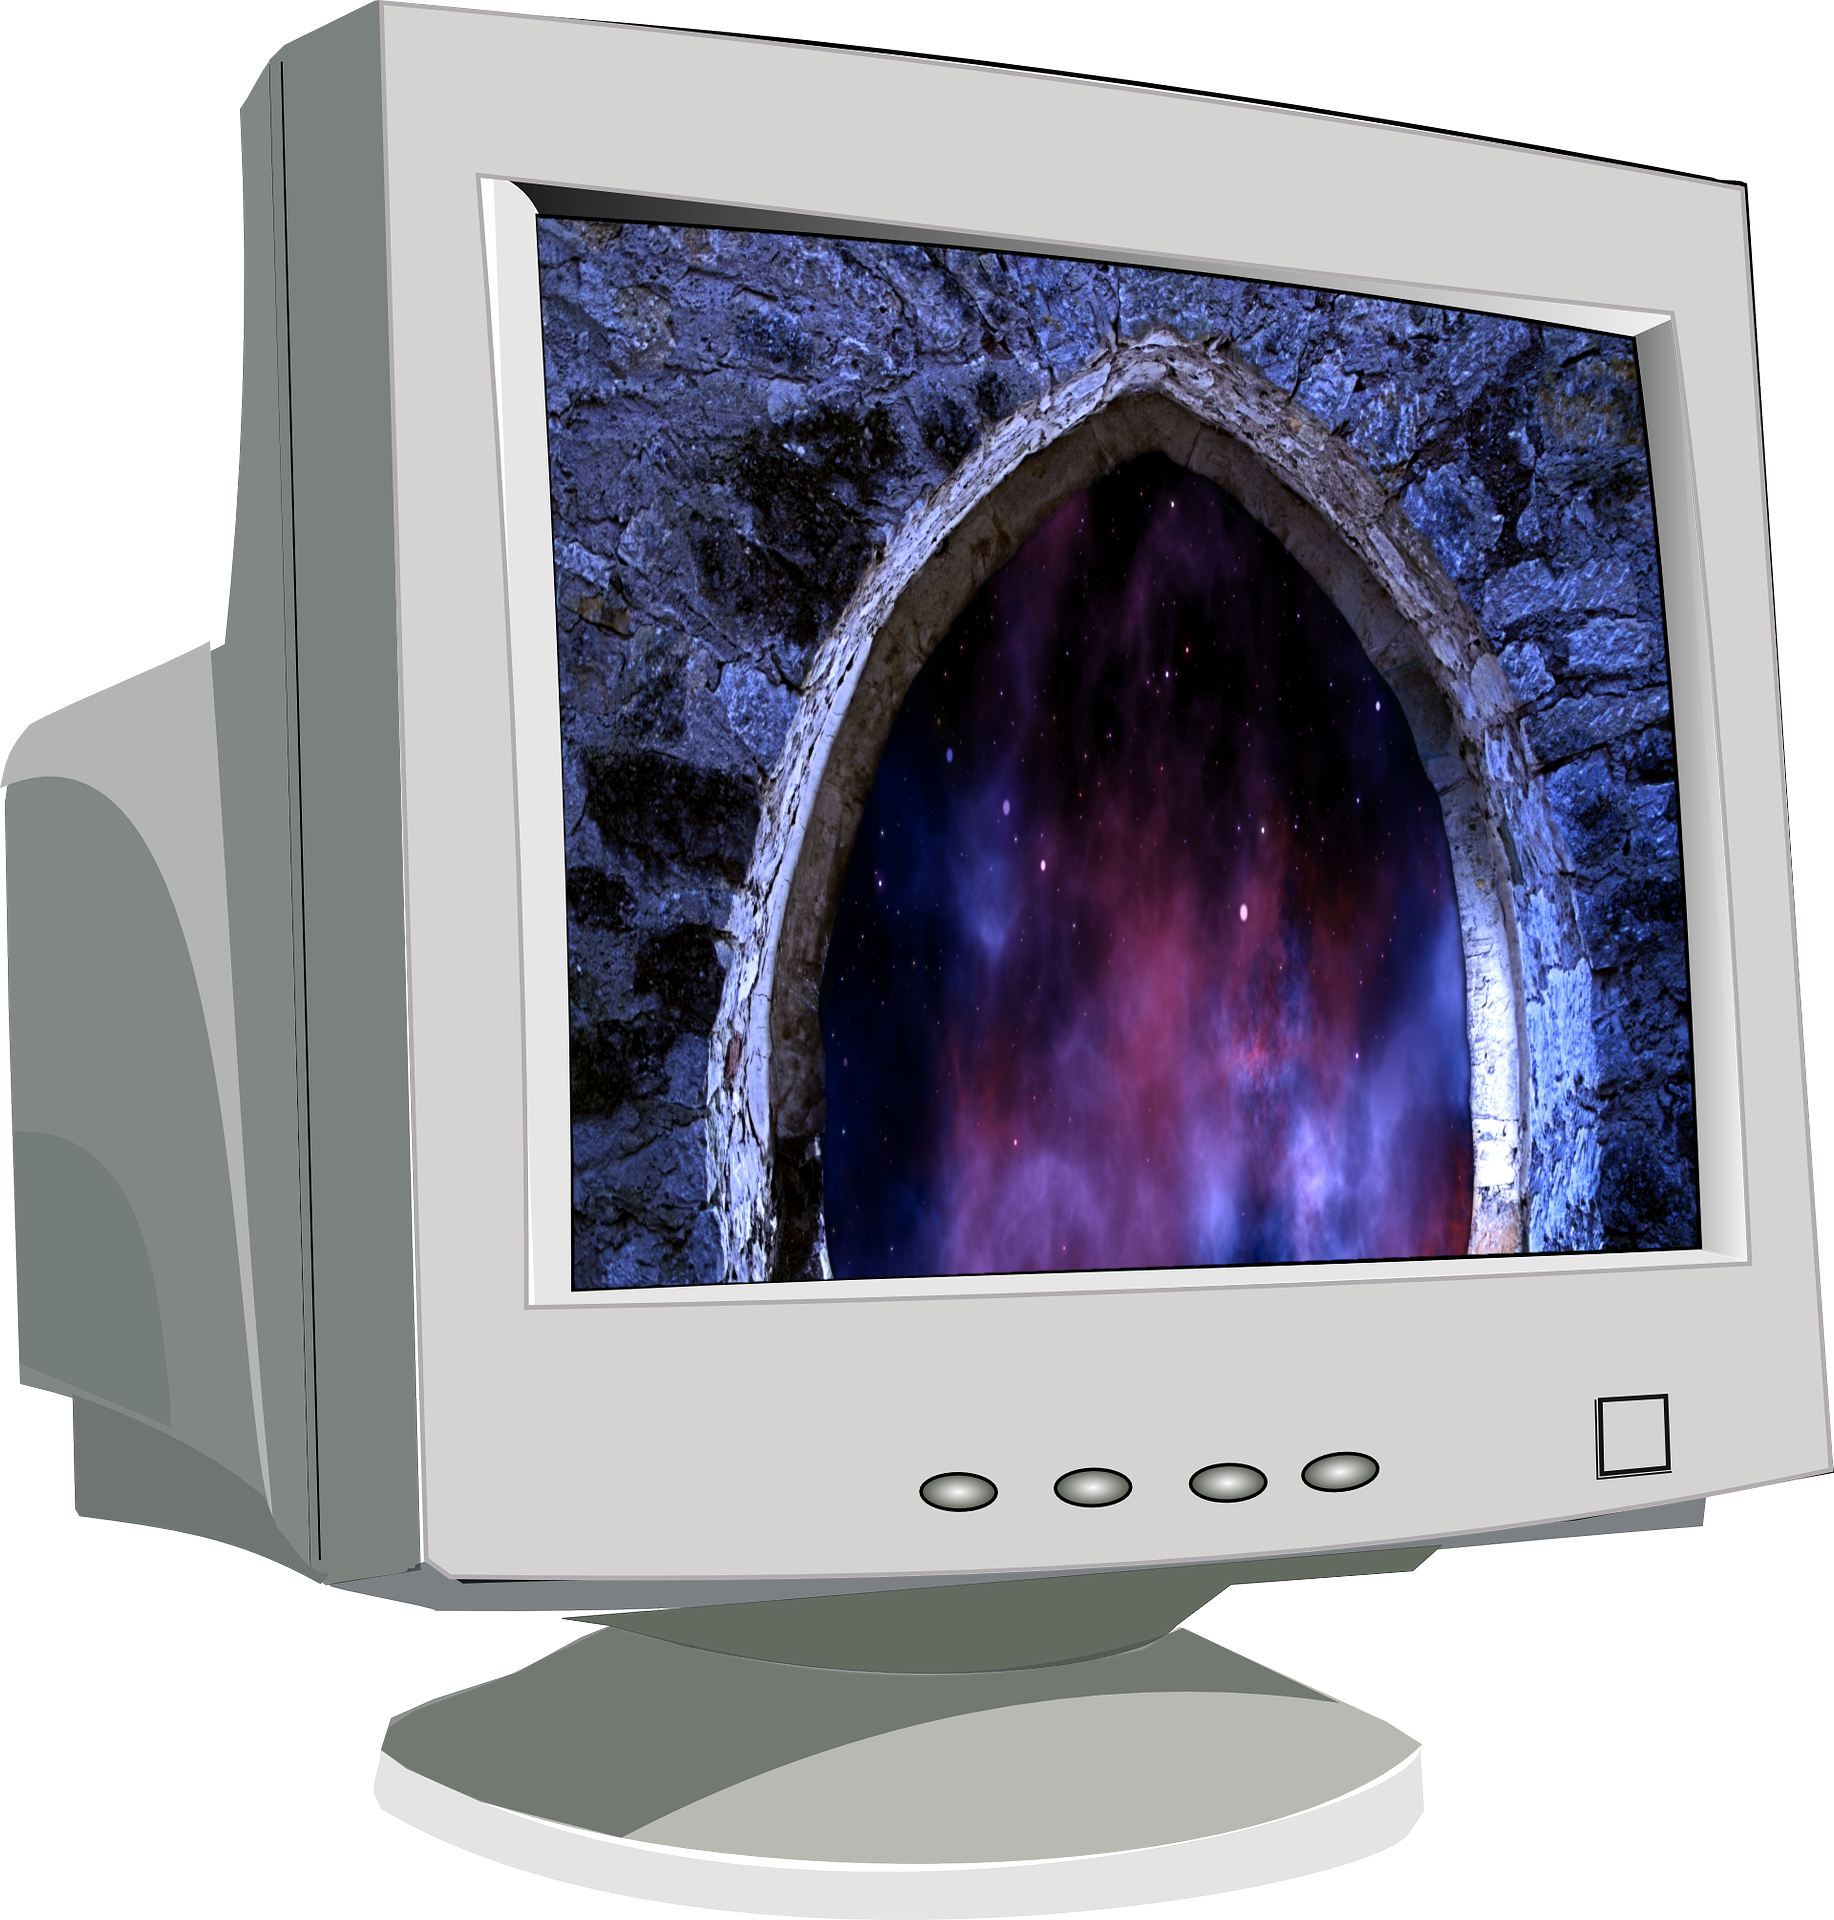 A Computer Monitor With A Purple And Blue Image On The Screen